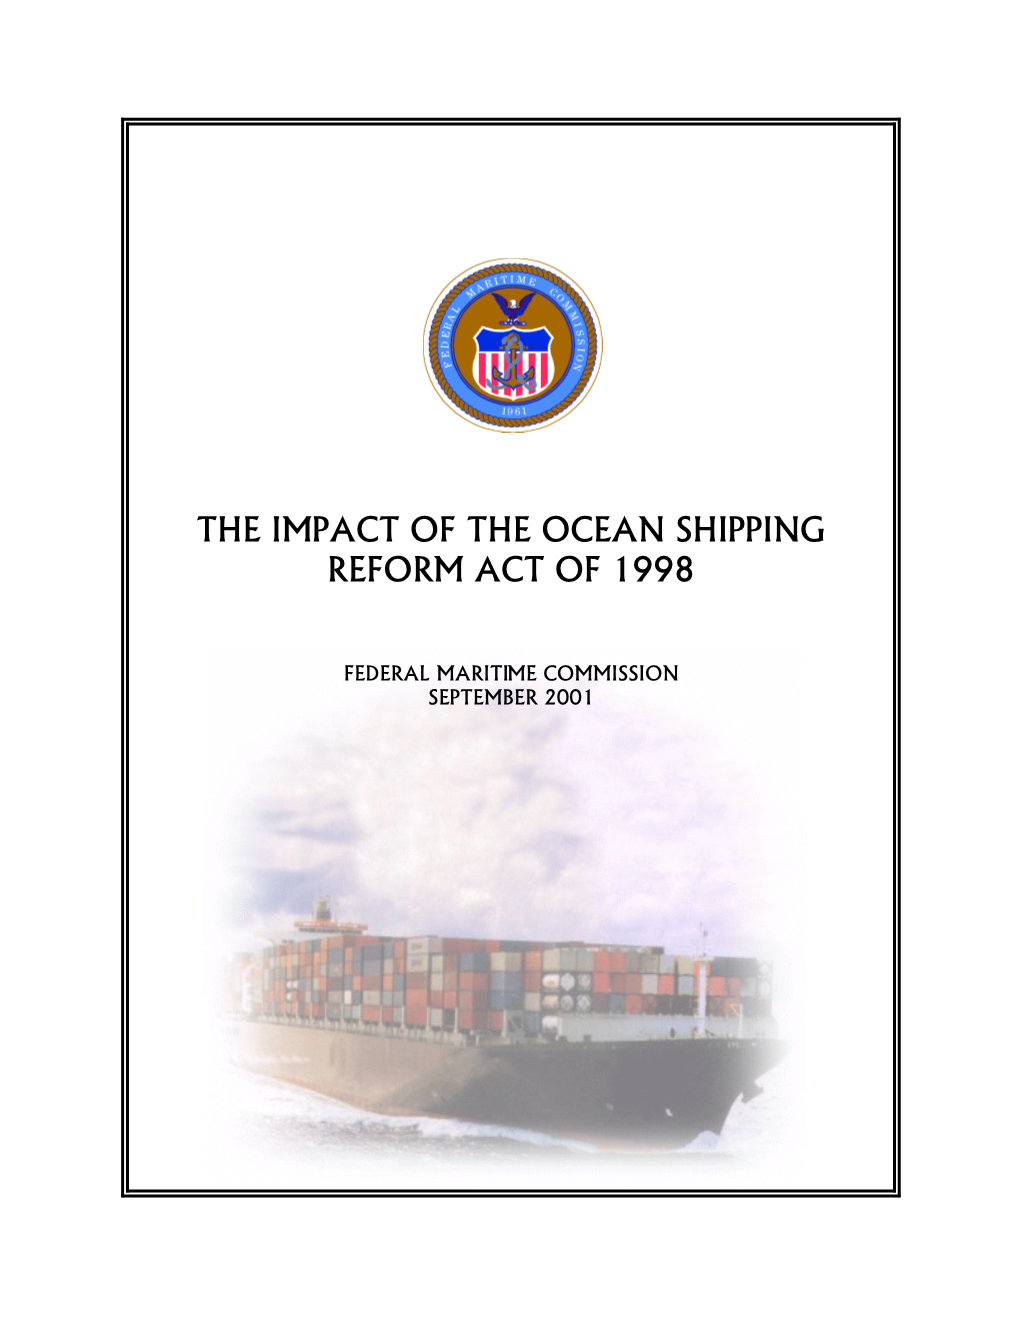 The Impact of the Ocean Shipping Reform Act of 1998